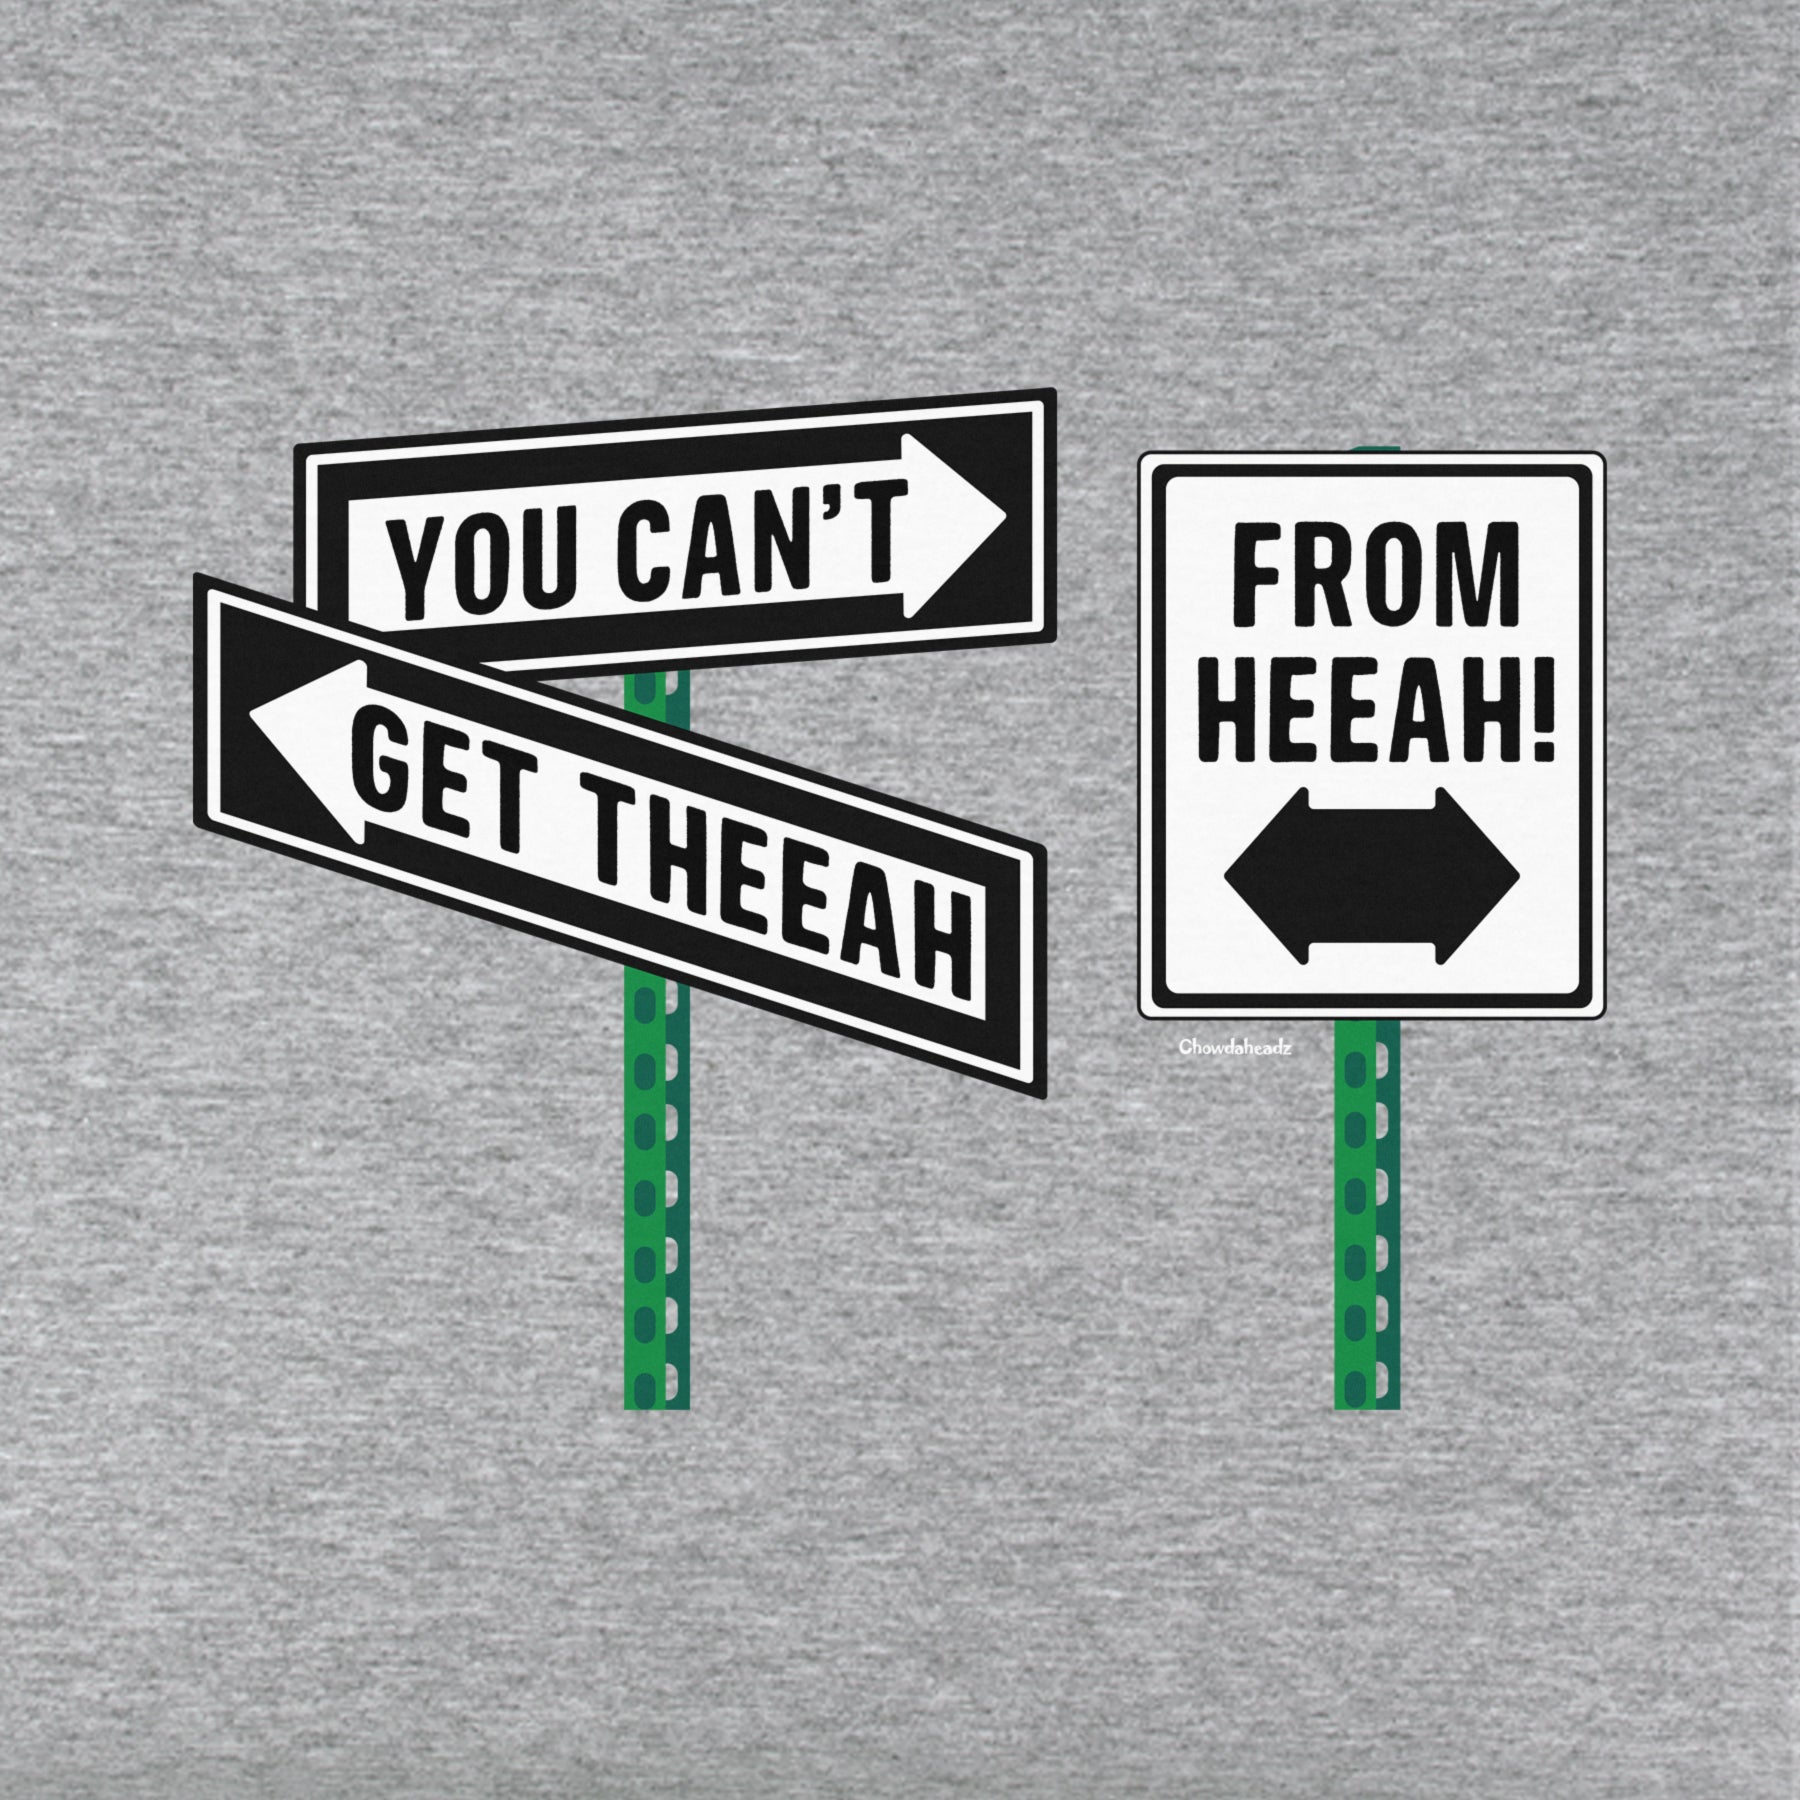 You Can't Get Theeah From Heeah! Youth T-Shirt - Chowdaheadz